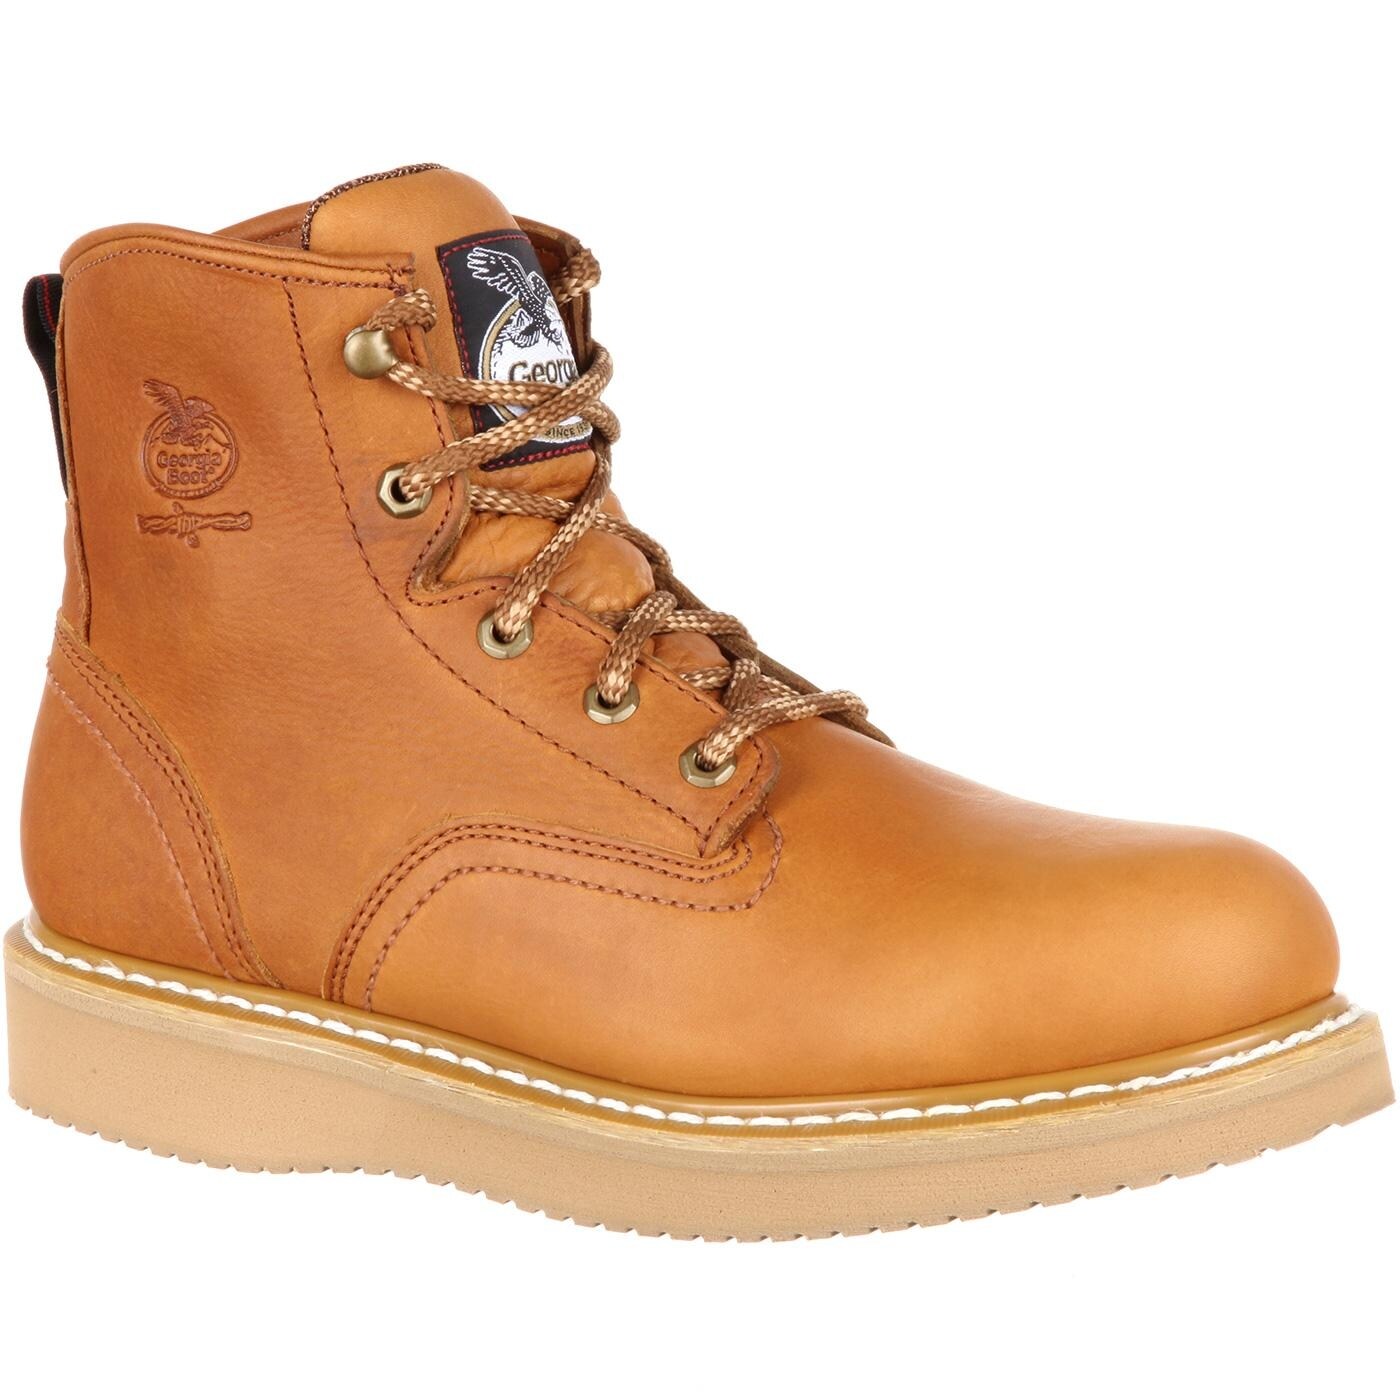 wedge style work boots